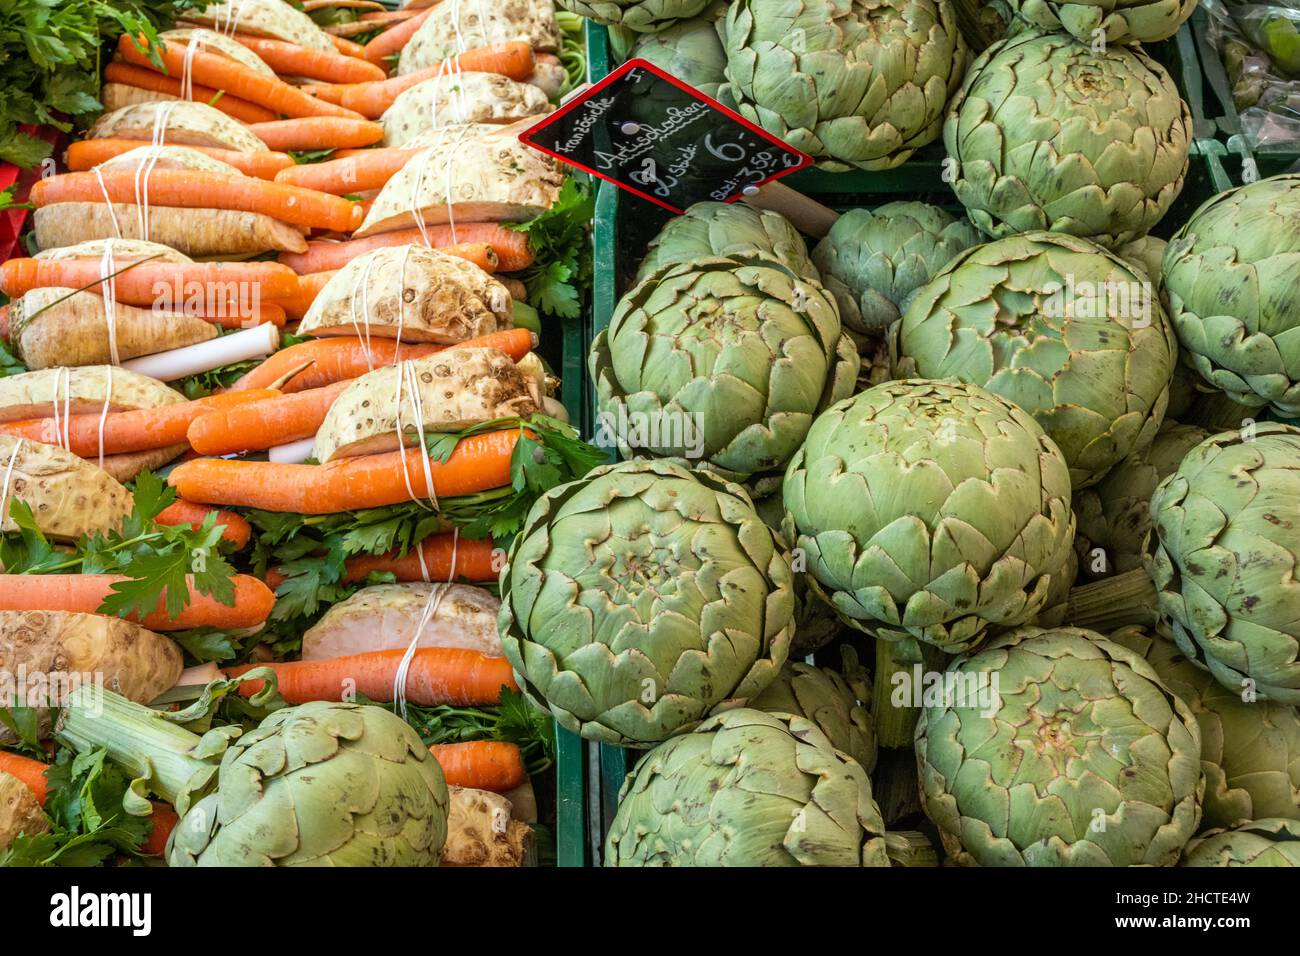 Soup greens and artichokes for sale at a market Stock Photo